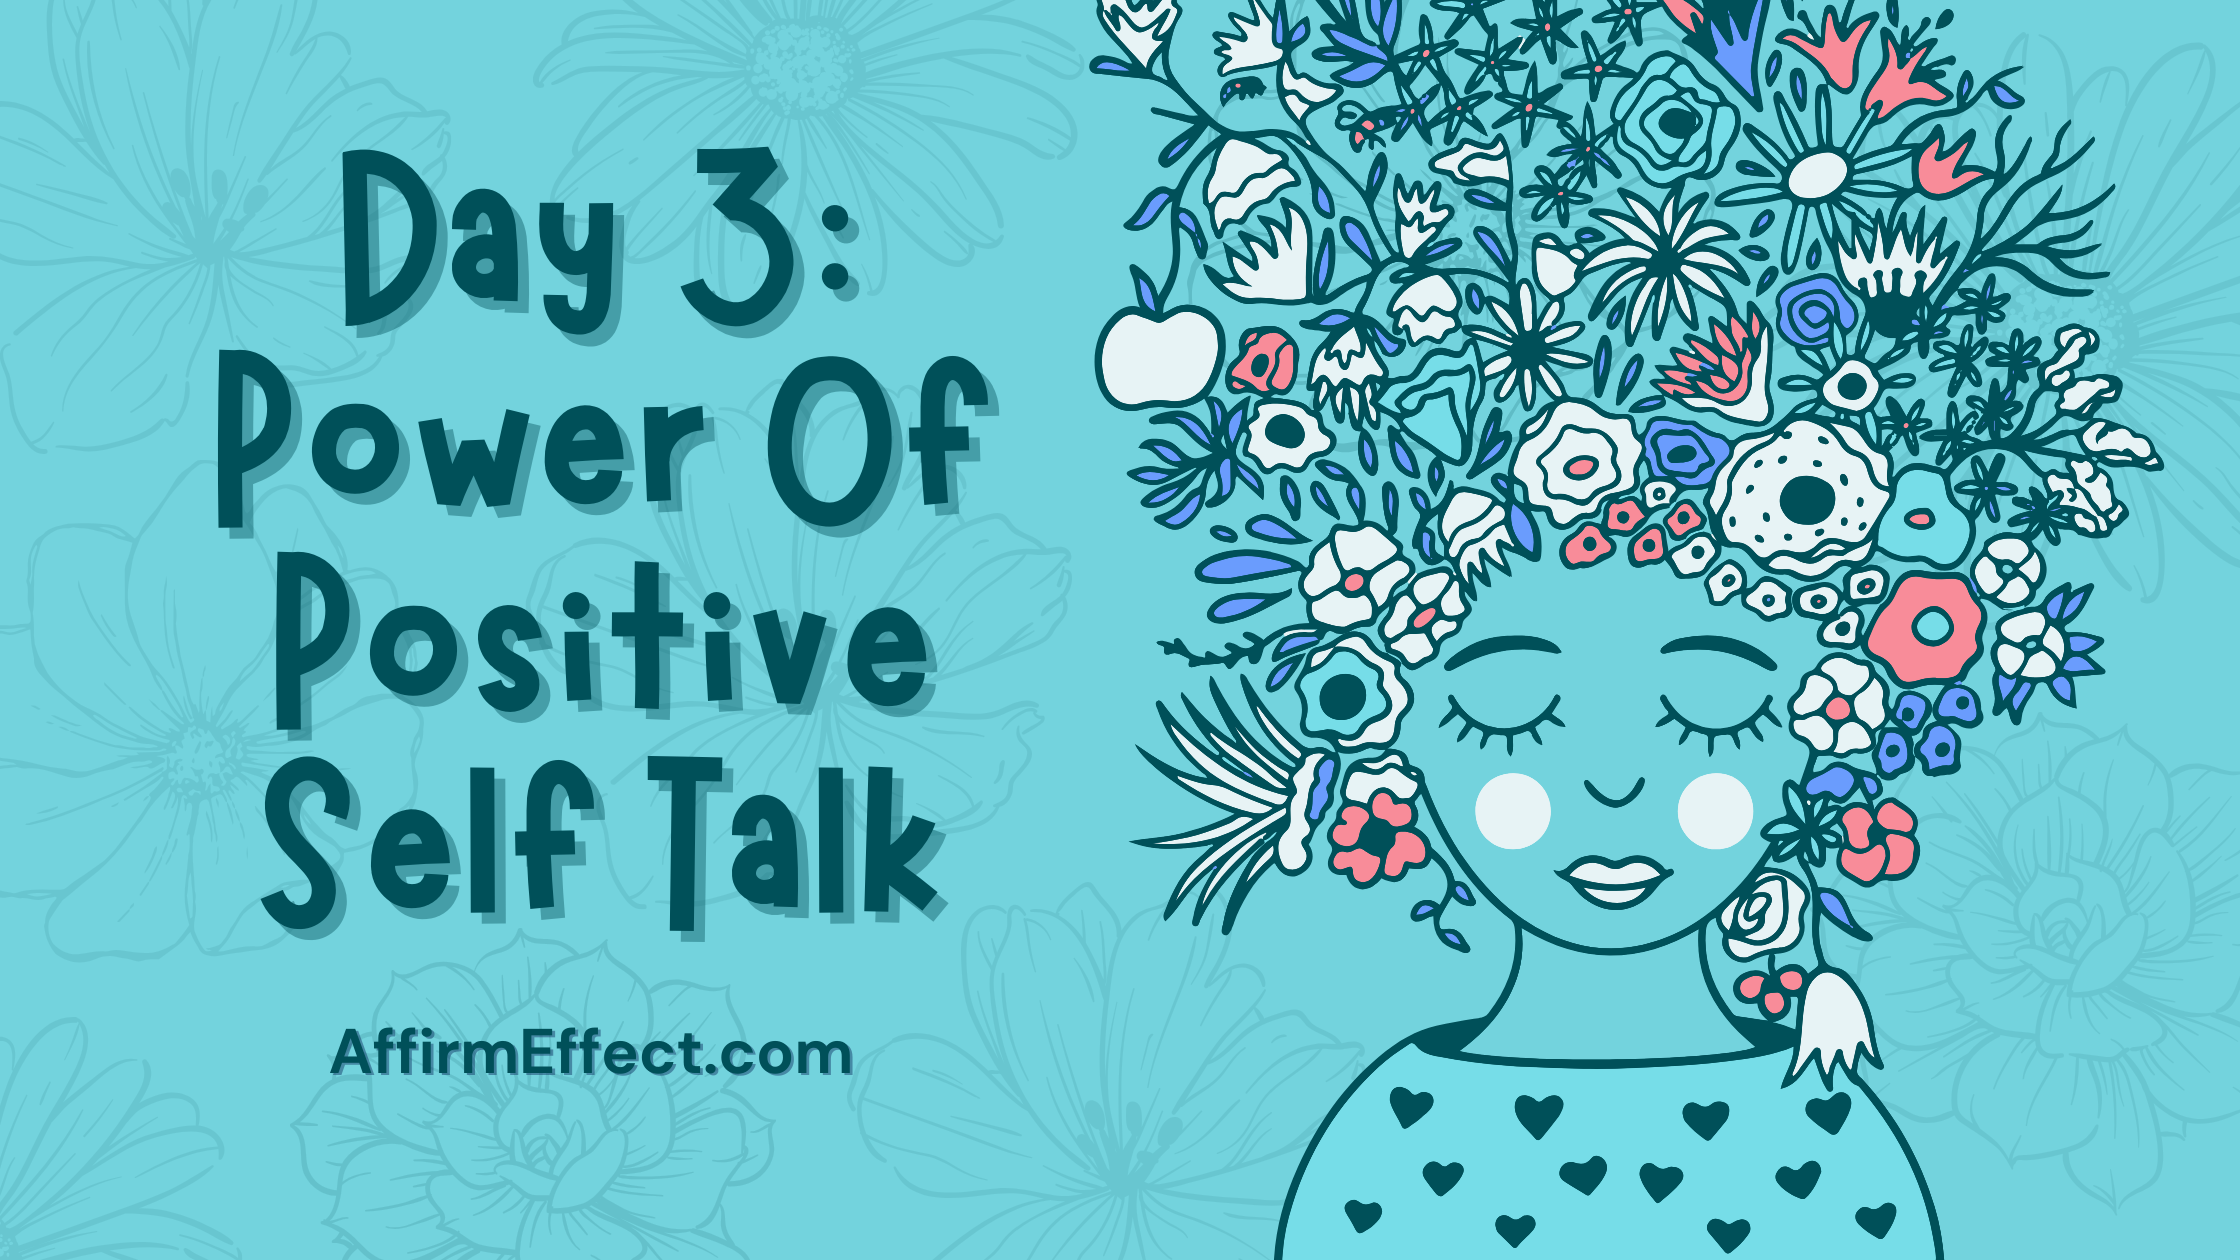 Day 3: The Power of Positive Self-talk and How to Cultivate It